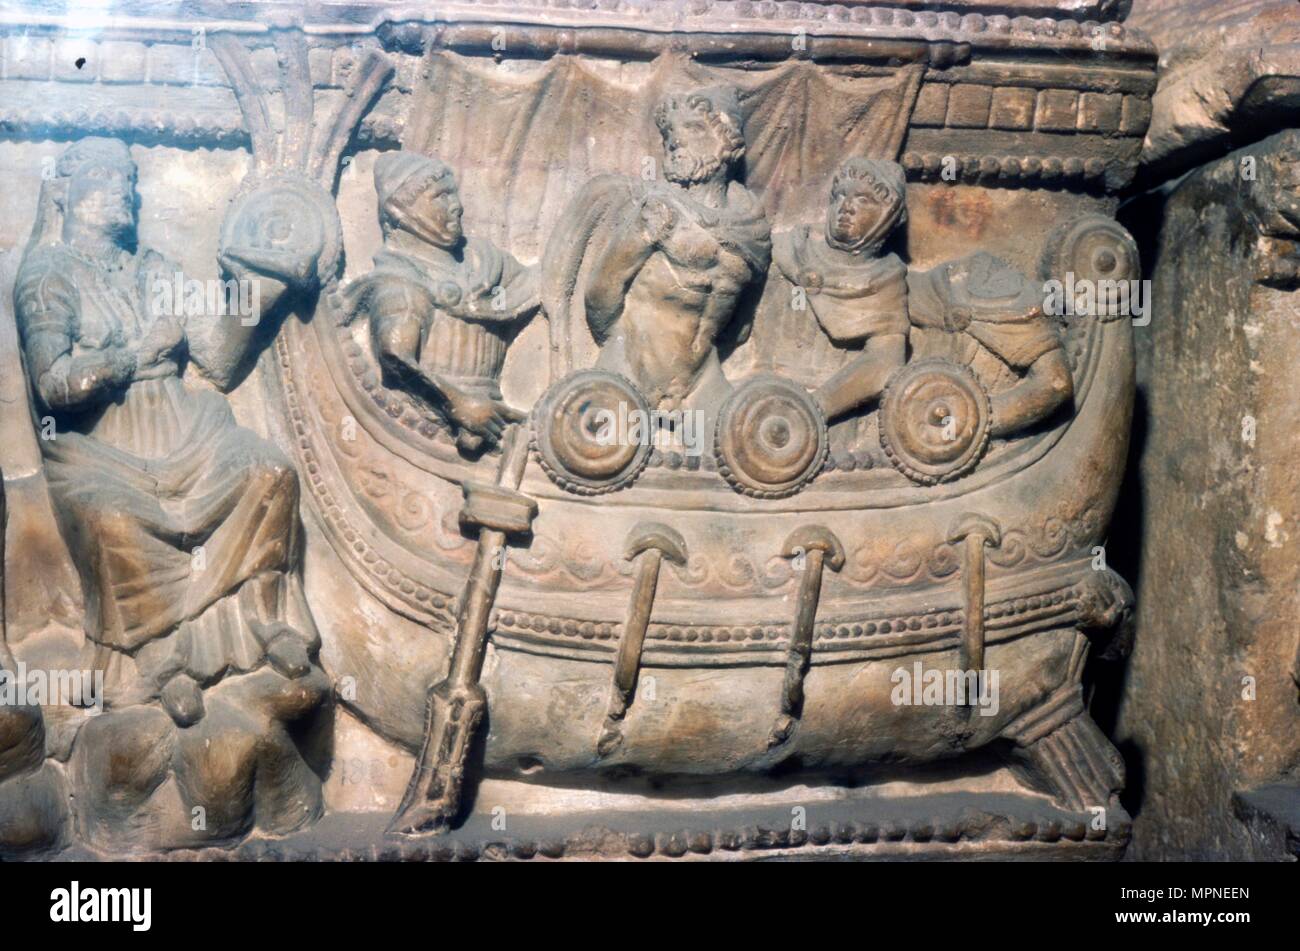 Etruscan Relief on funerary Urn, Odysseus (Ulysses) bound to mast with Sirens, c4th century BC. Artist: Unknown. Stock Photo